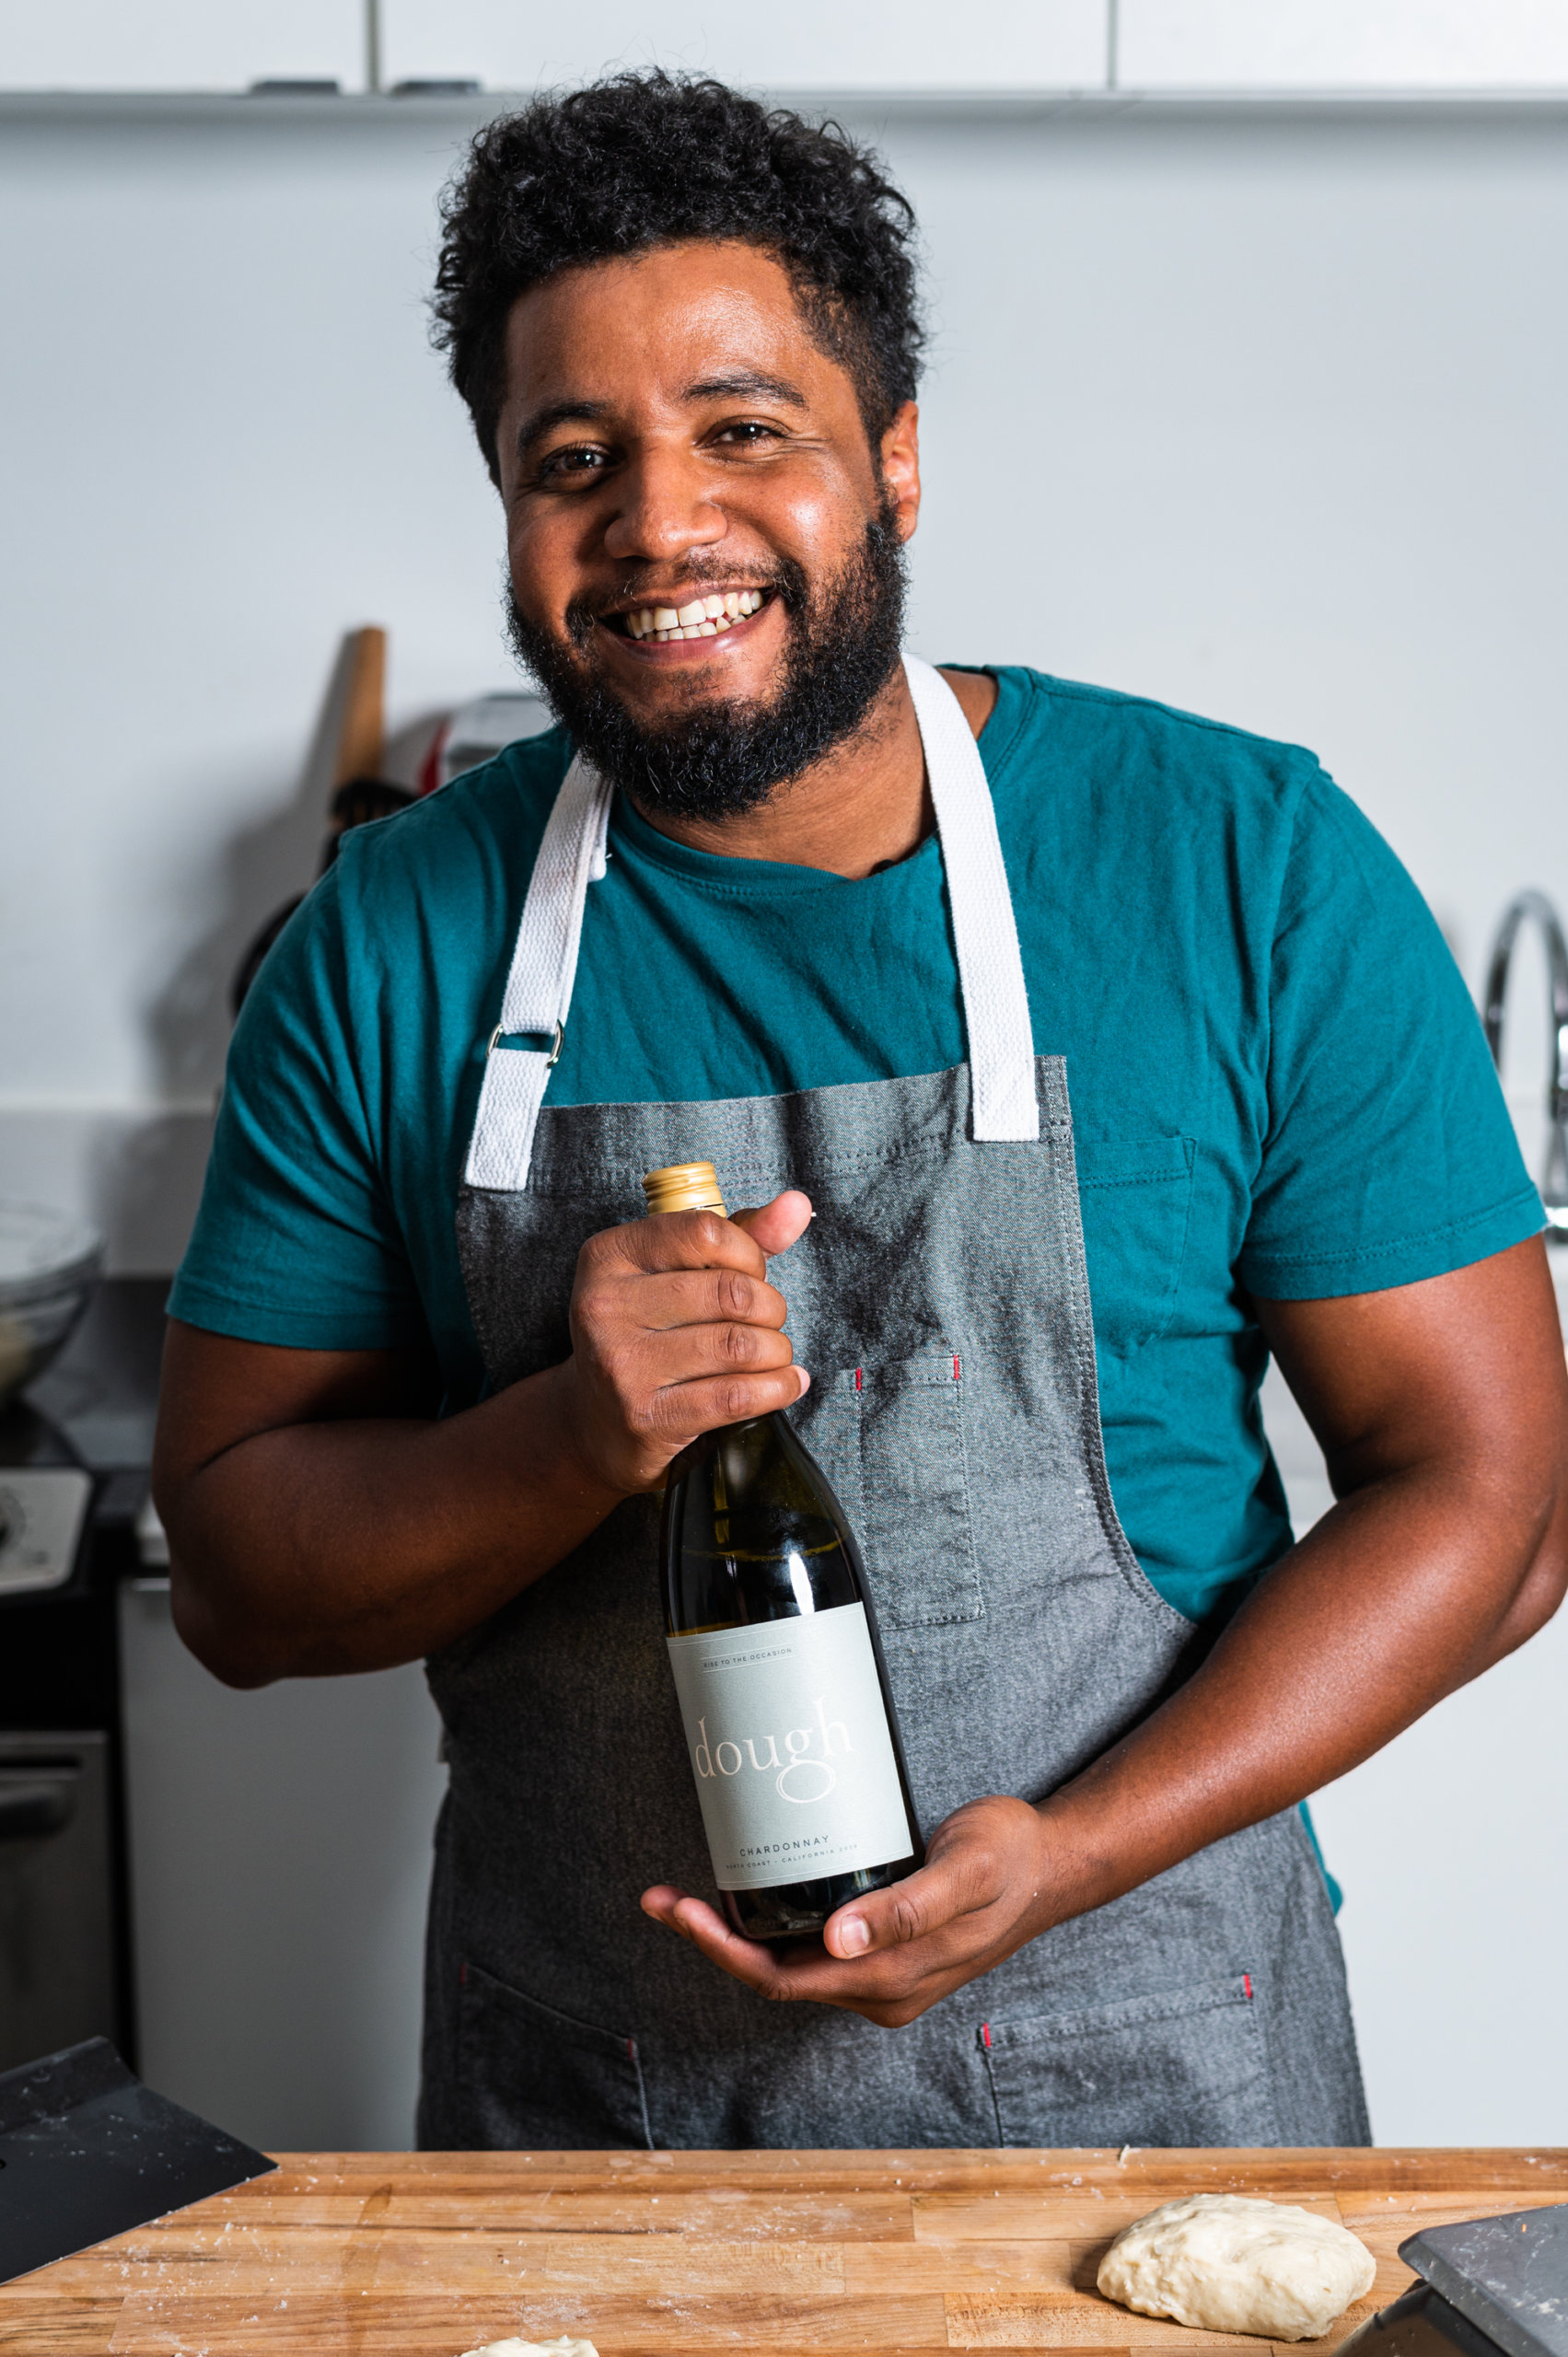 Bryan Ford poses in his kitchen with a bottle of Dough Wines